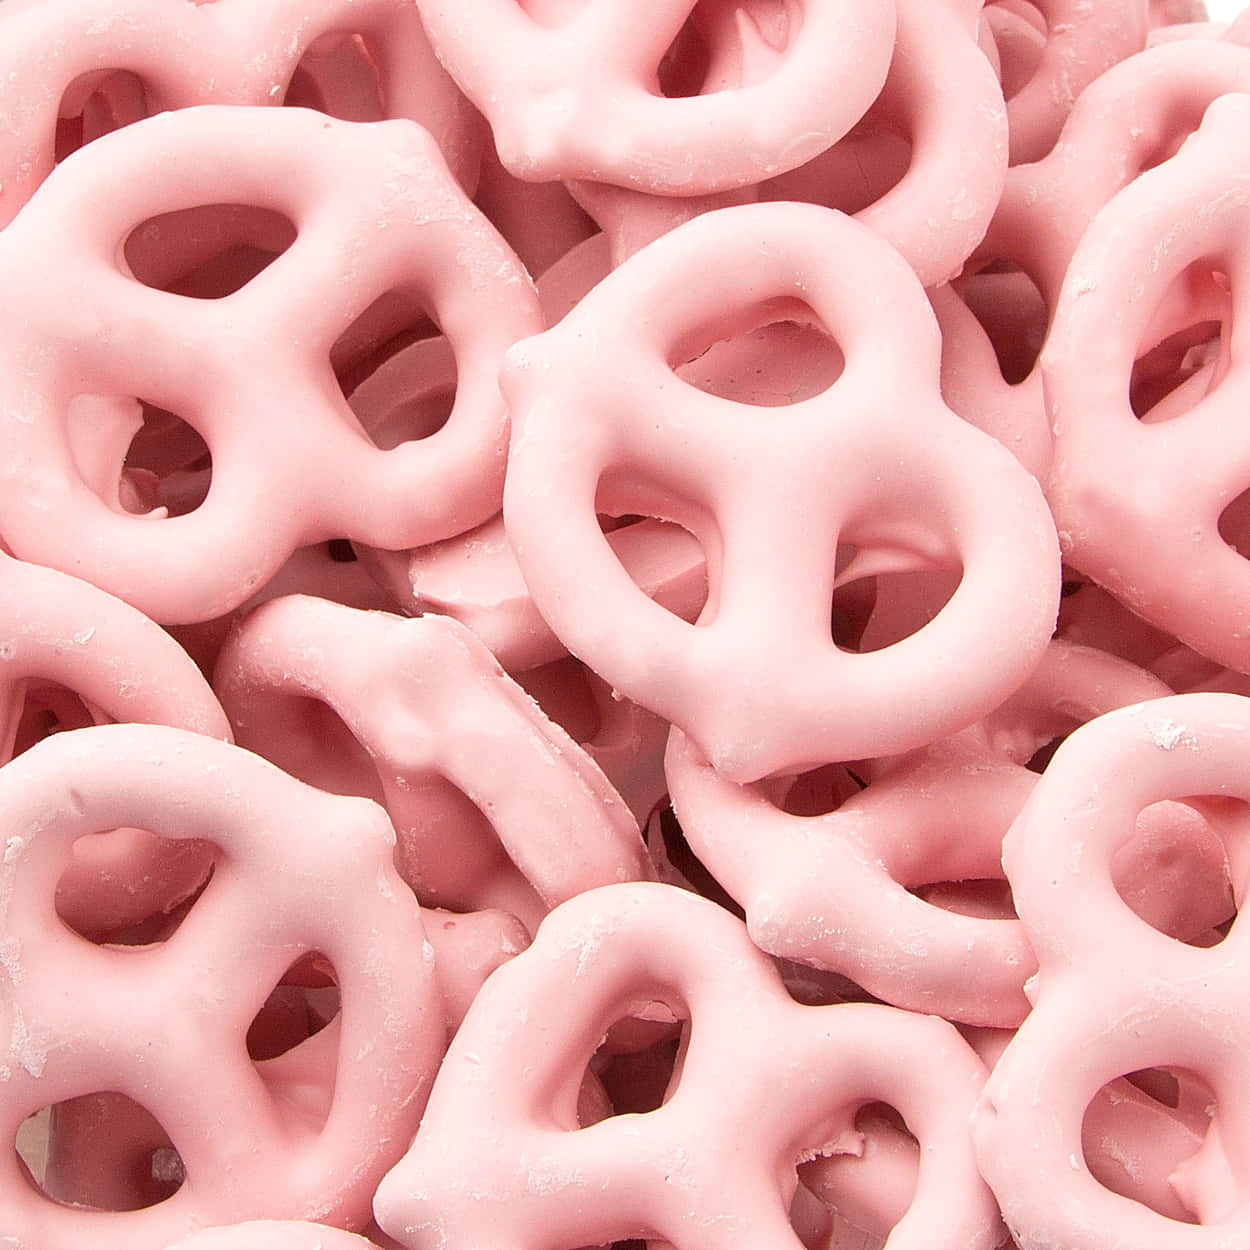 Pink Pretzels On A White Surface